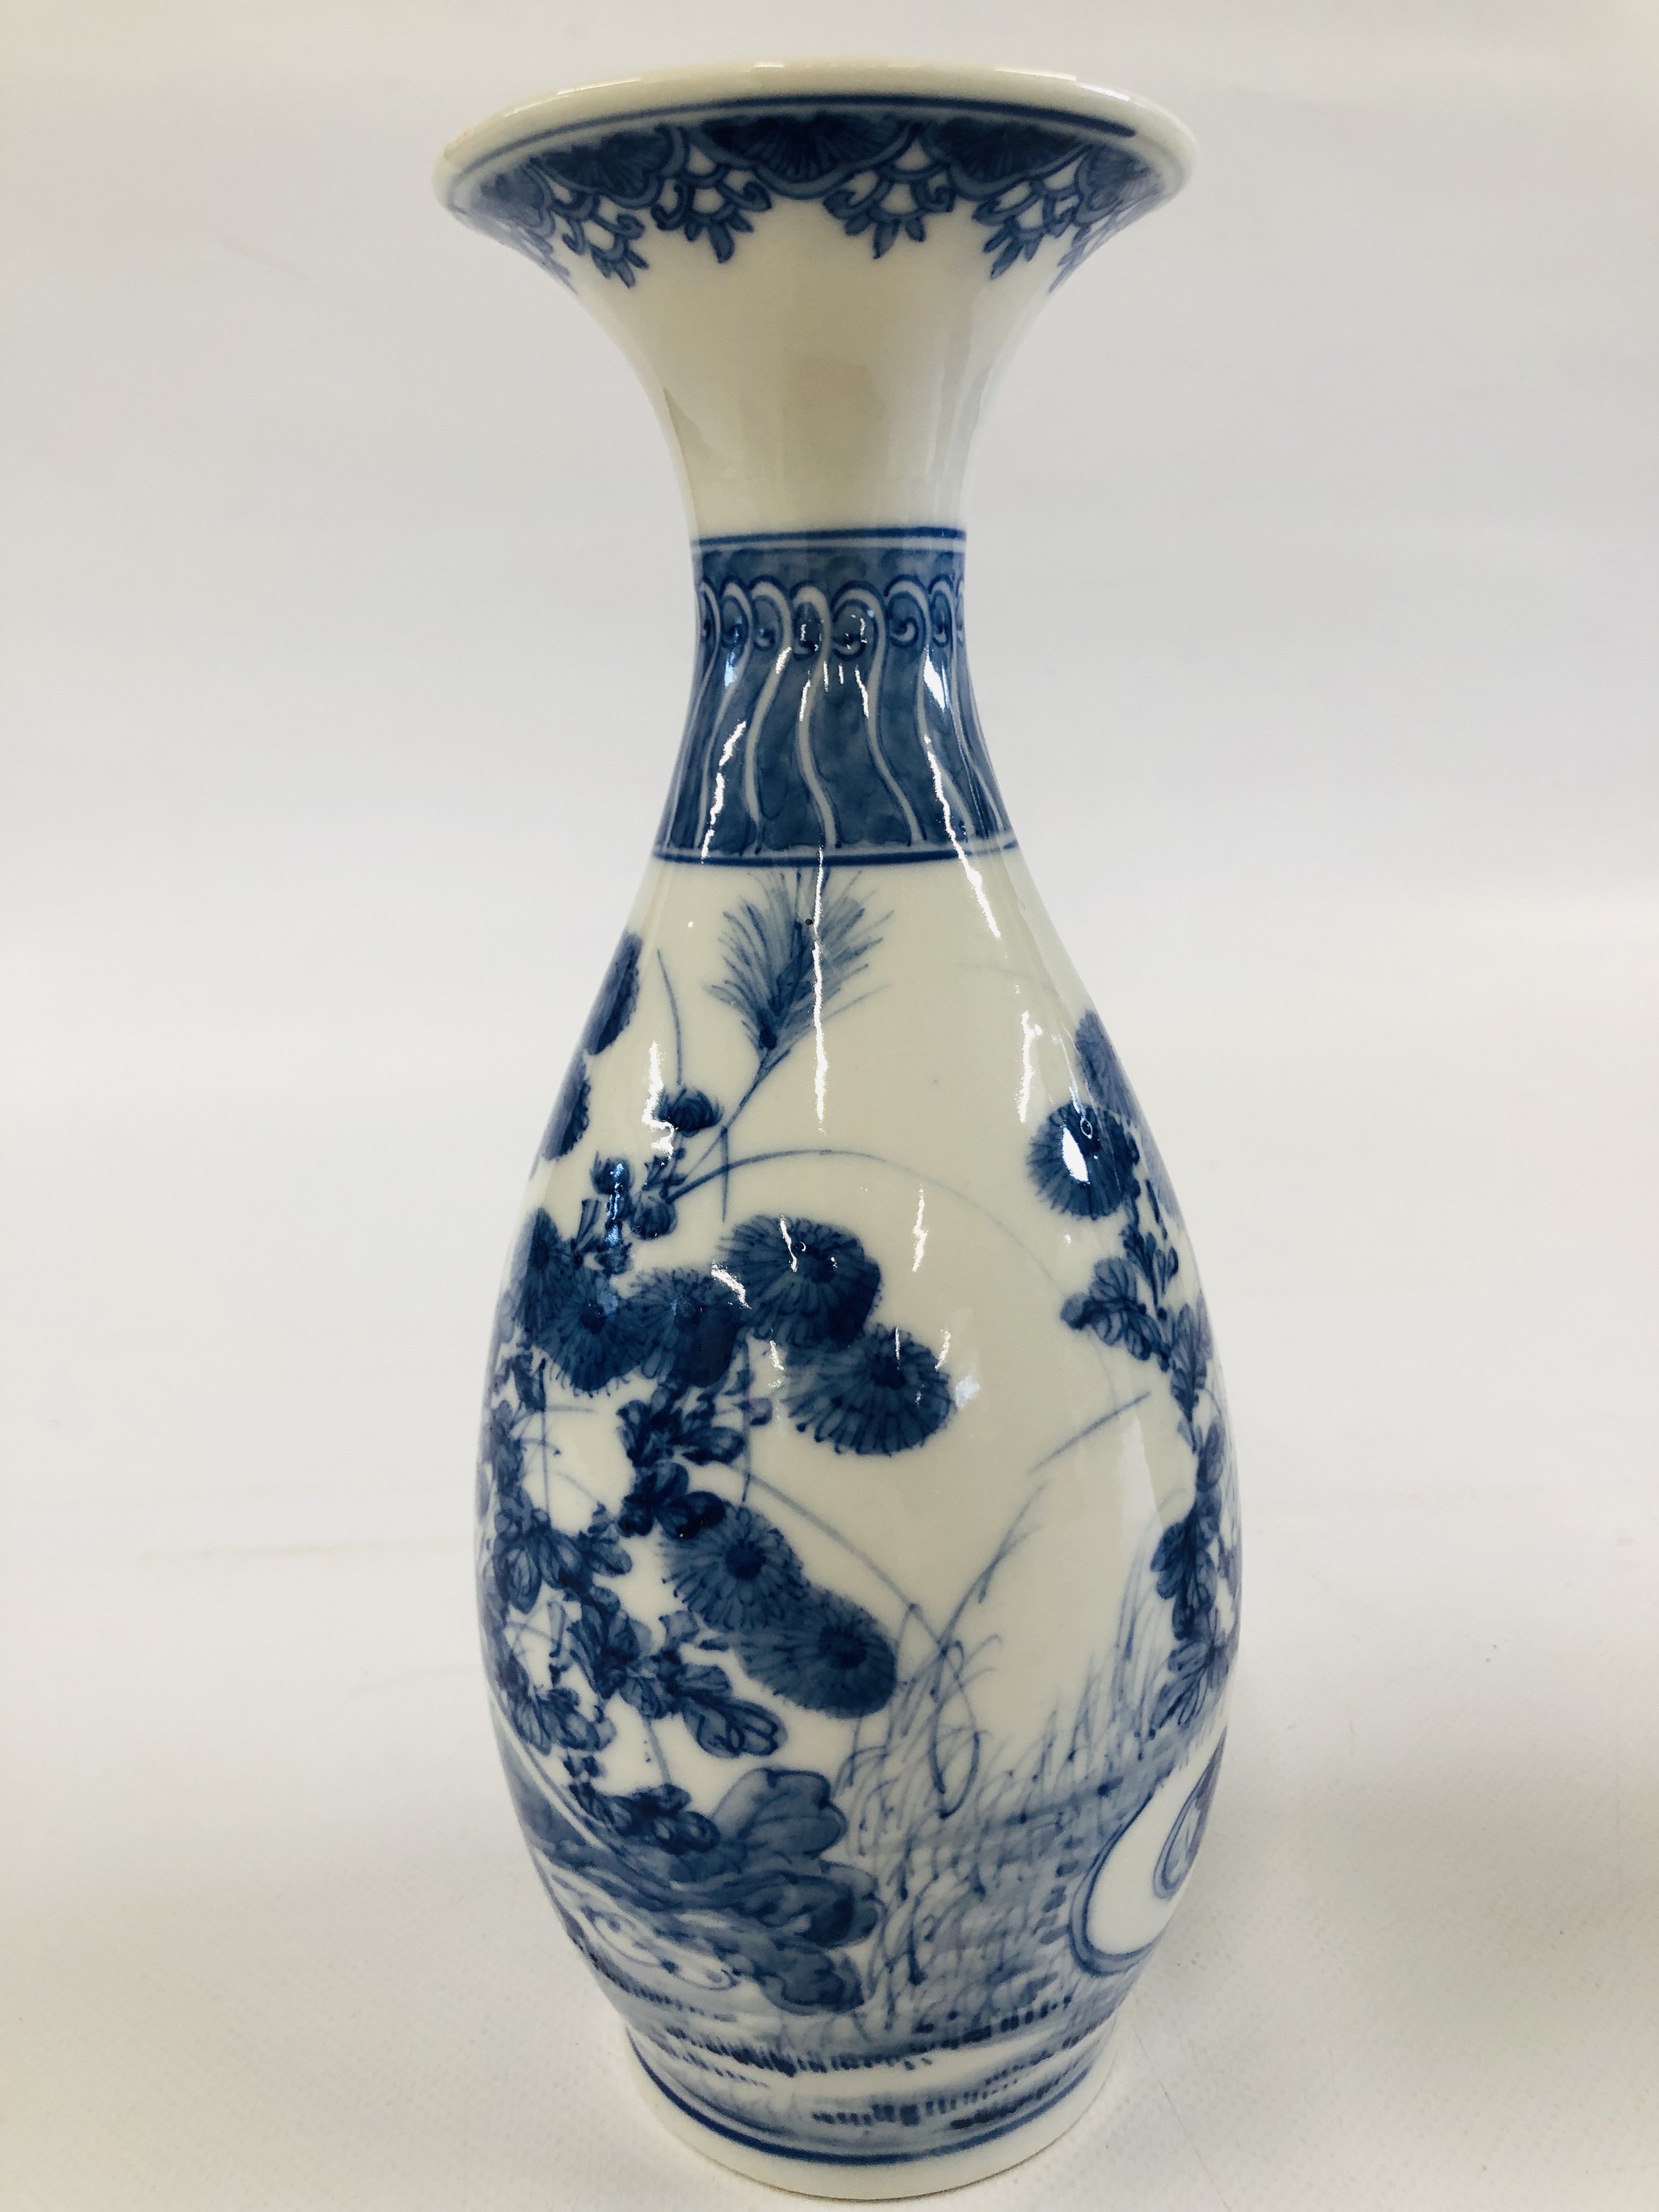 A PAIR OF DECORATIVE BLUE AND WHITE ORIENTAL VASES DEPICTING A PREGNANT WOMAN SEATED AMONGST THE - Image 12 of 13